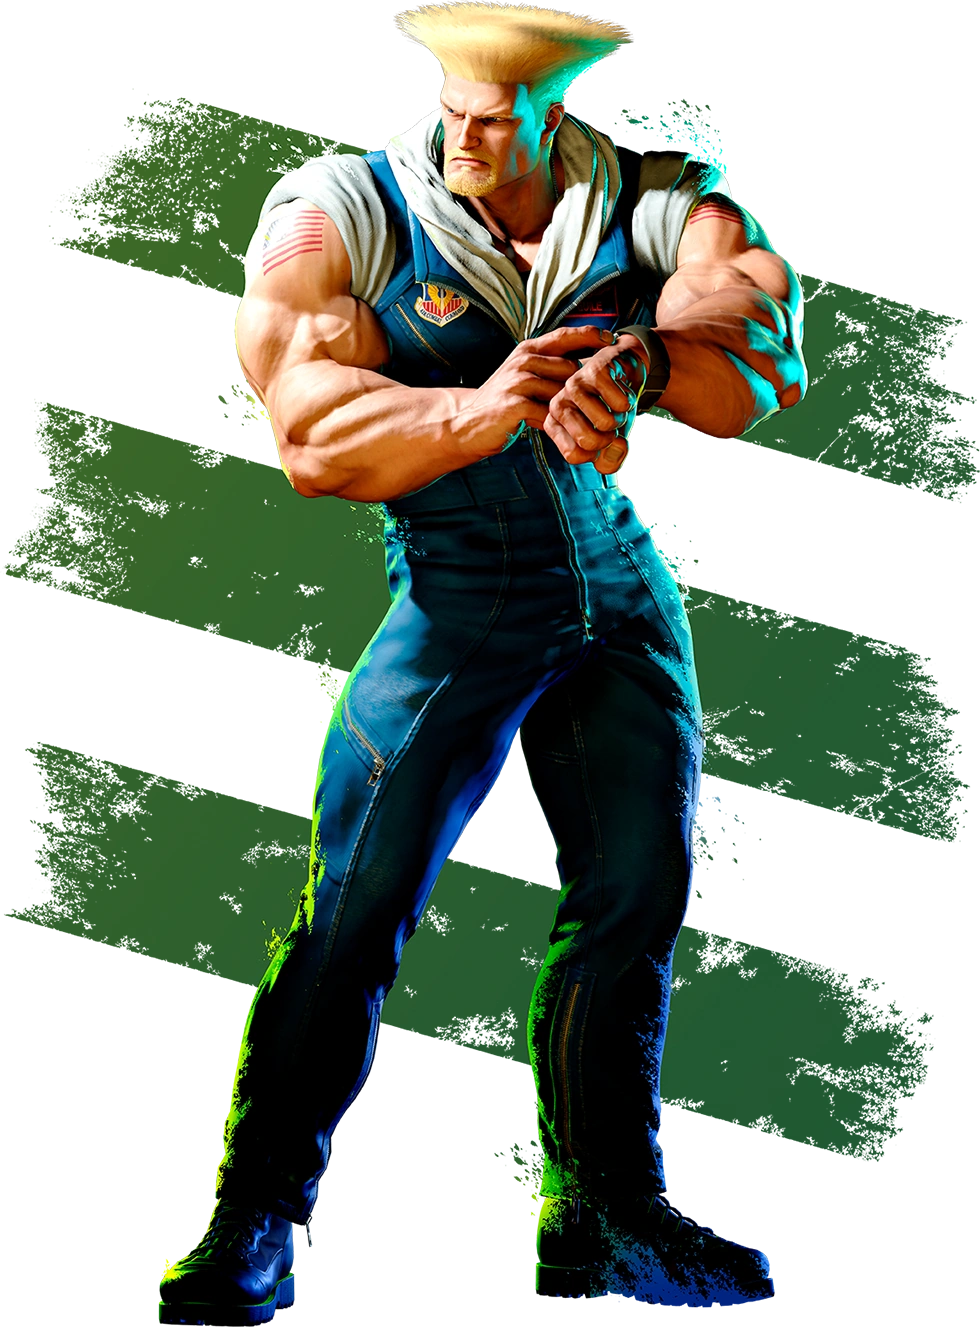 Eindra Store - Street Fighter IV Guile